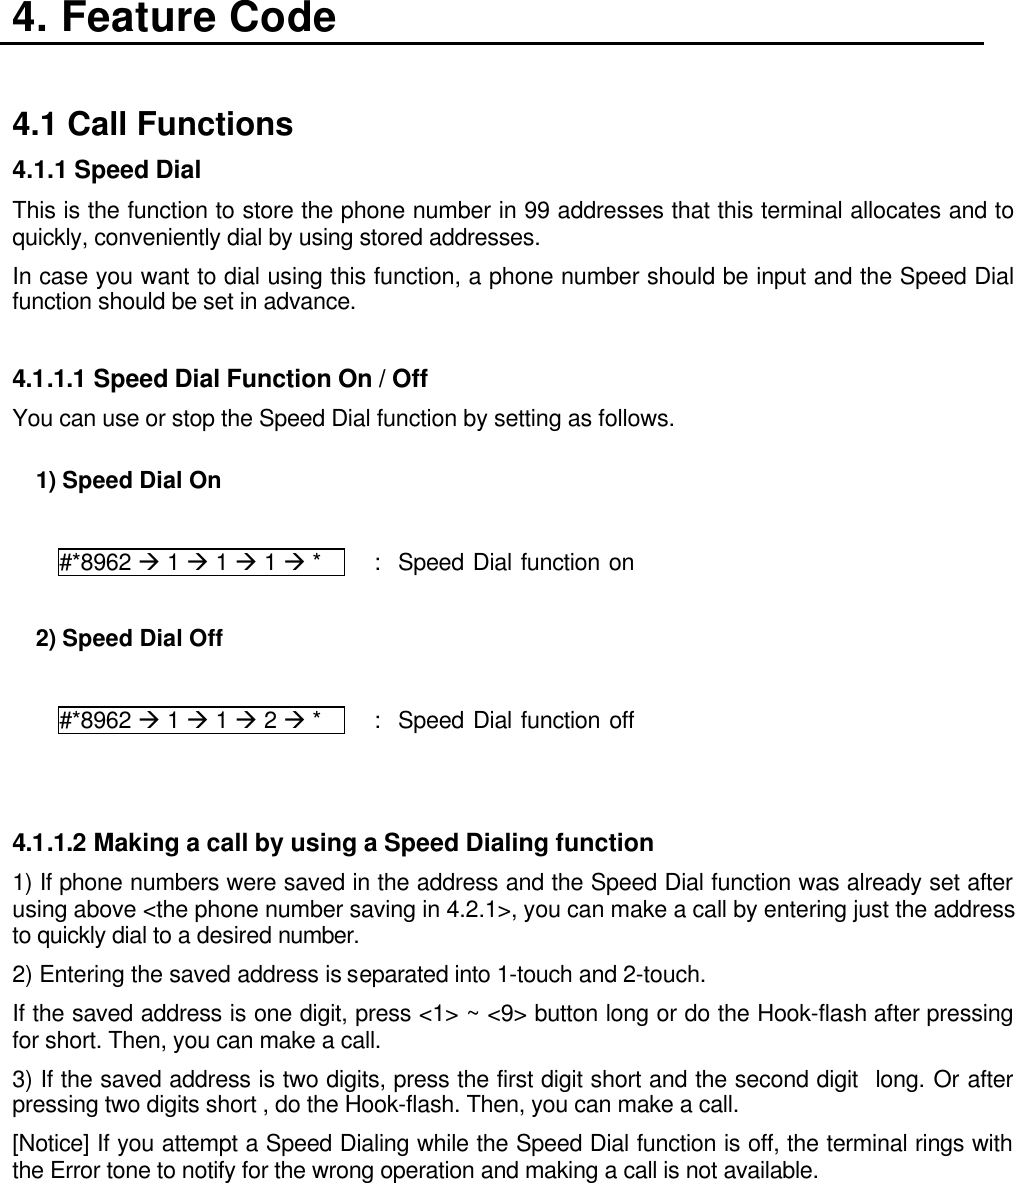 4. Feature Code  4.1 Call Functions 4.1.1 Speed Dial   This is the function to store the phone number in 99 addresses that this terminal allocates and to quickly, conveniently dial by using stored addresses. In case you want to dial using this function, a phone number should be input and the Speed Dial function should be set in advance.  4.1.1.1 Speed Dial Function On / Off You can use or stop the Speed Dial function by setting as follows.           1) Speed Dial On  #*8962 à 1 à 1 à 1 à *     :  Speed Dial function on  2) Speed Dial Off  #*8962 à 1 à 1 à 2 à *     :  Speed Dial function off   4.1.1.2 Making a call by using a Speed Dialing function   1) If phone numbers were saved in the address and the Speed Dial function was already set after using above &lt;the phone number saving in 4.2.1&gt;, you can make a call by entering just the address to quickly dial to a desired number. 2) Entering the saved address is separated into 1-touch and 2-touch. If the saved address is one digit, press &lt;1&gt; ~ &lt;9&gt; button long or do the Hook-flash after pressing for short. Then, you can make a call. 3) If the saved address is two digits, press the first digit short and the second digit  long. Or after pressing two digits short , do the Hook-flash. Then, you can make a call. [Notice] If you attempt a Speed Dialing while the Speed Dial function is off, the terminal rings with the Error tone to notify for the wrong operation and making a call is not available.    